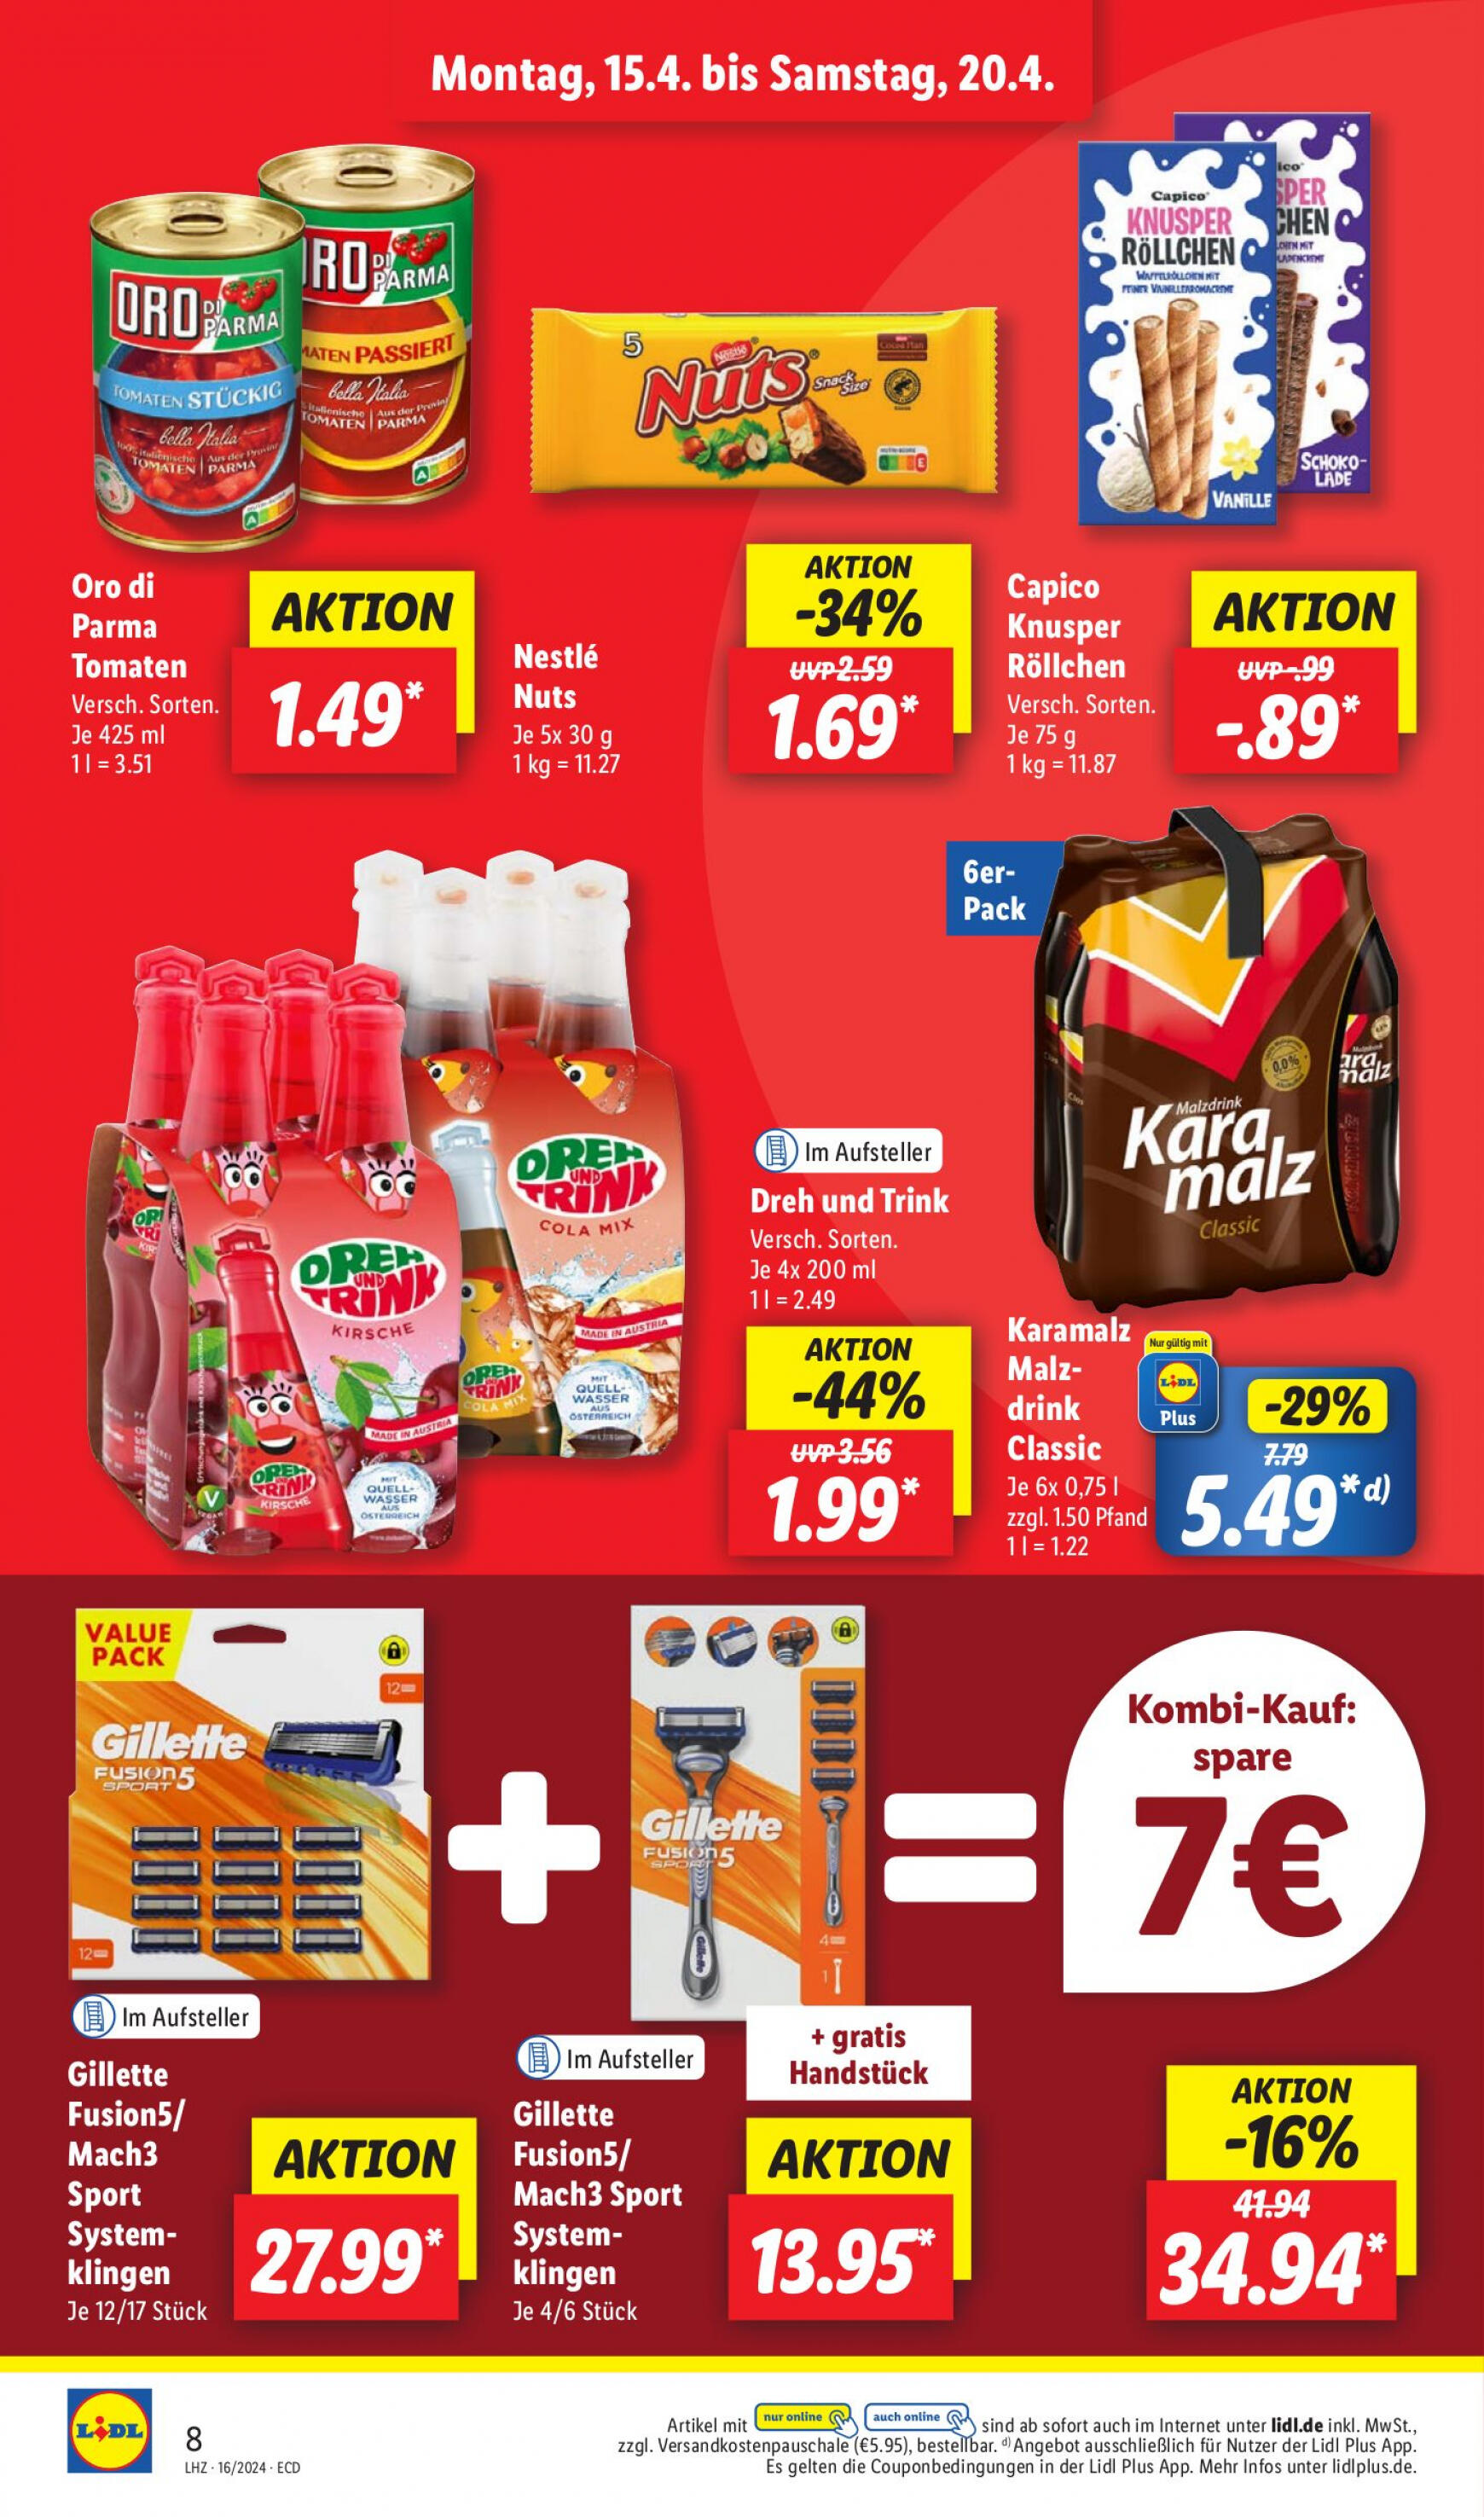 lidl - Flyer Lidl aktuell 15.04. - 20.04. - page: 12